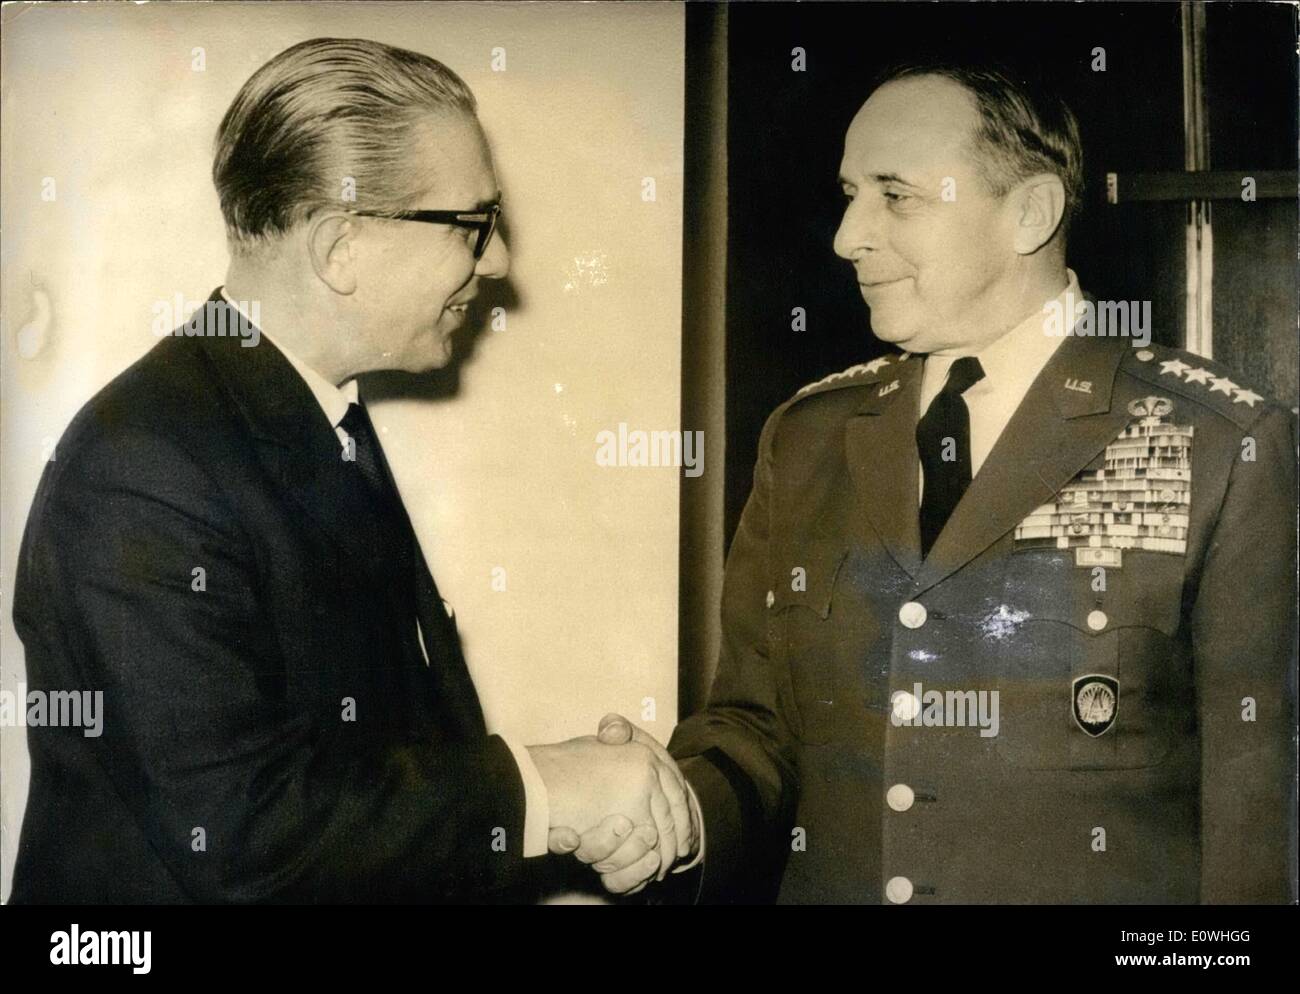 Feb. 02, 1963 - General Lemnitzer at Bonn: General Lyman L. Lemnitzer visited the German Minister of Defence, Kai-Uwe von Hassel. On February 6th at Born. During a ''some-hours-discussion'' there could be found an agreement regarding all questions of the common defence. General Lemnitzer flew than in the later afternoon to the Nato-Headquarter near Paris. Photo shows Federal Minister of Defence Kai-Uwe von Hassel - left- welcomes General Lemnitzer -right - at Bonn. Stock Photo